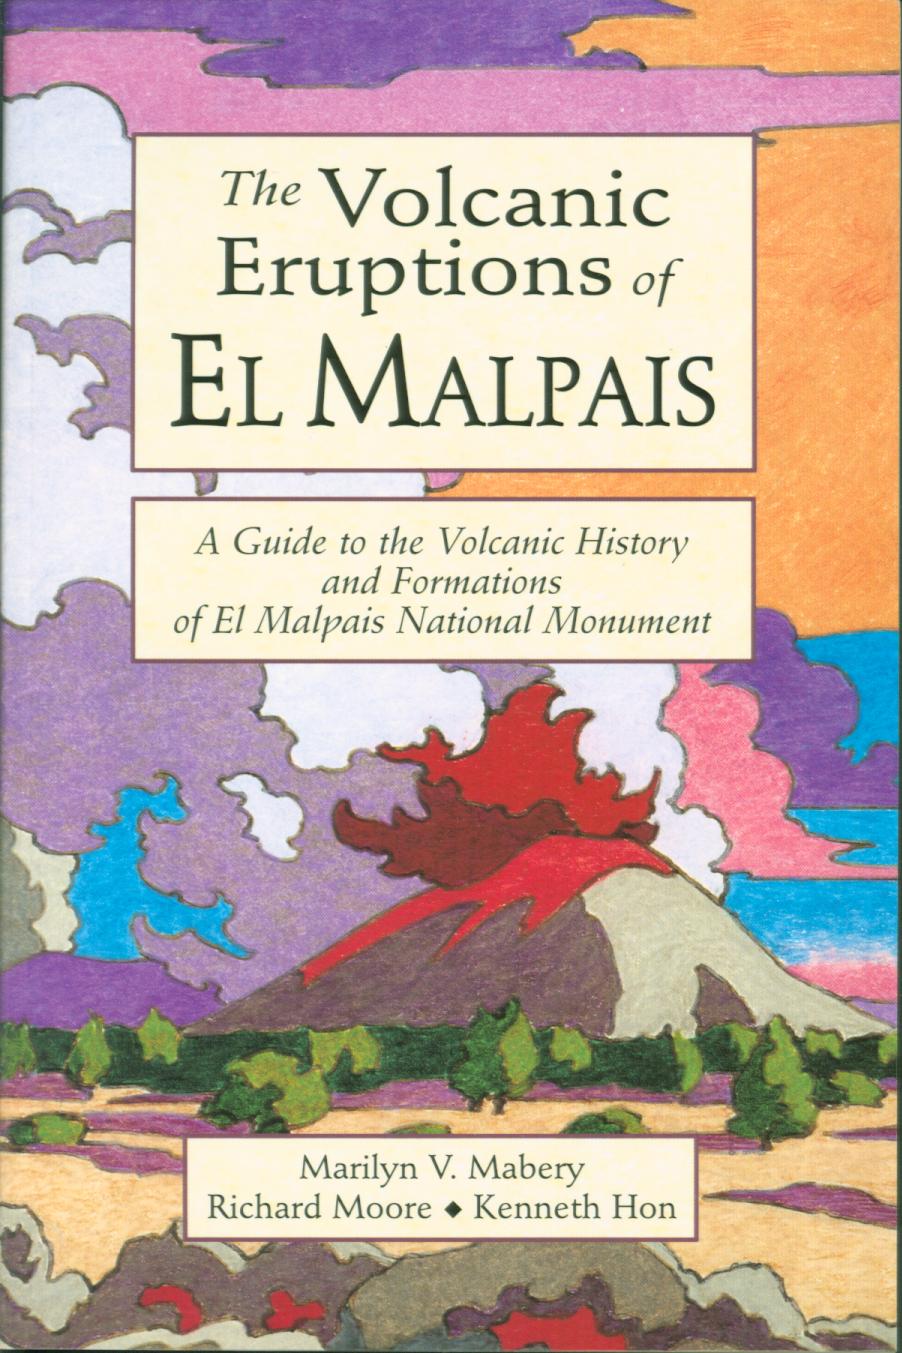 THE VOLCANIC ERUPTIONS OF EL MALPAIS: a guide to the volcanic history and formations of El Malpais National Monument (NM).